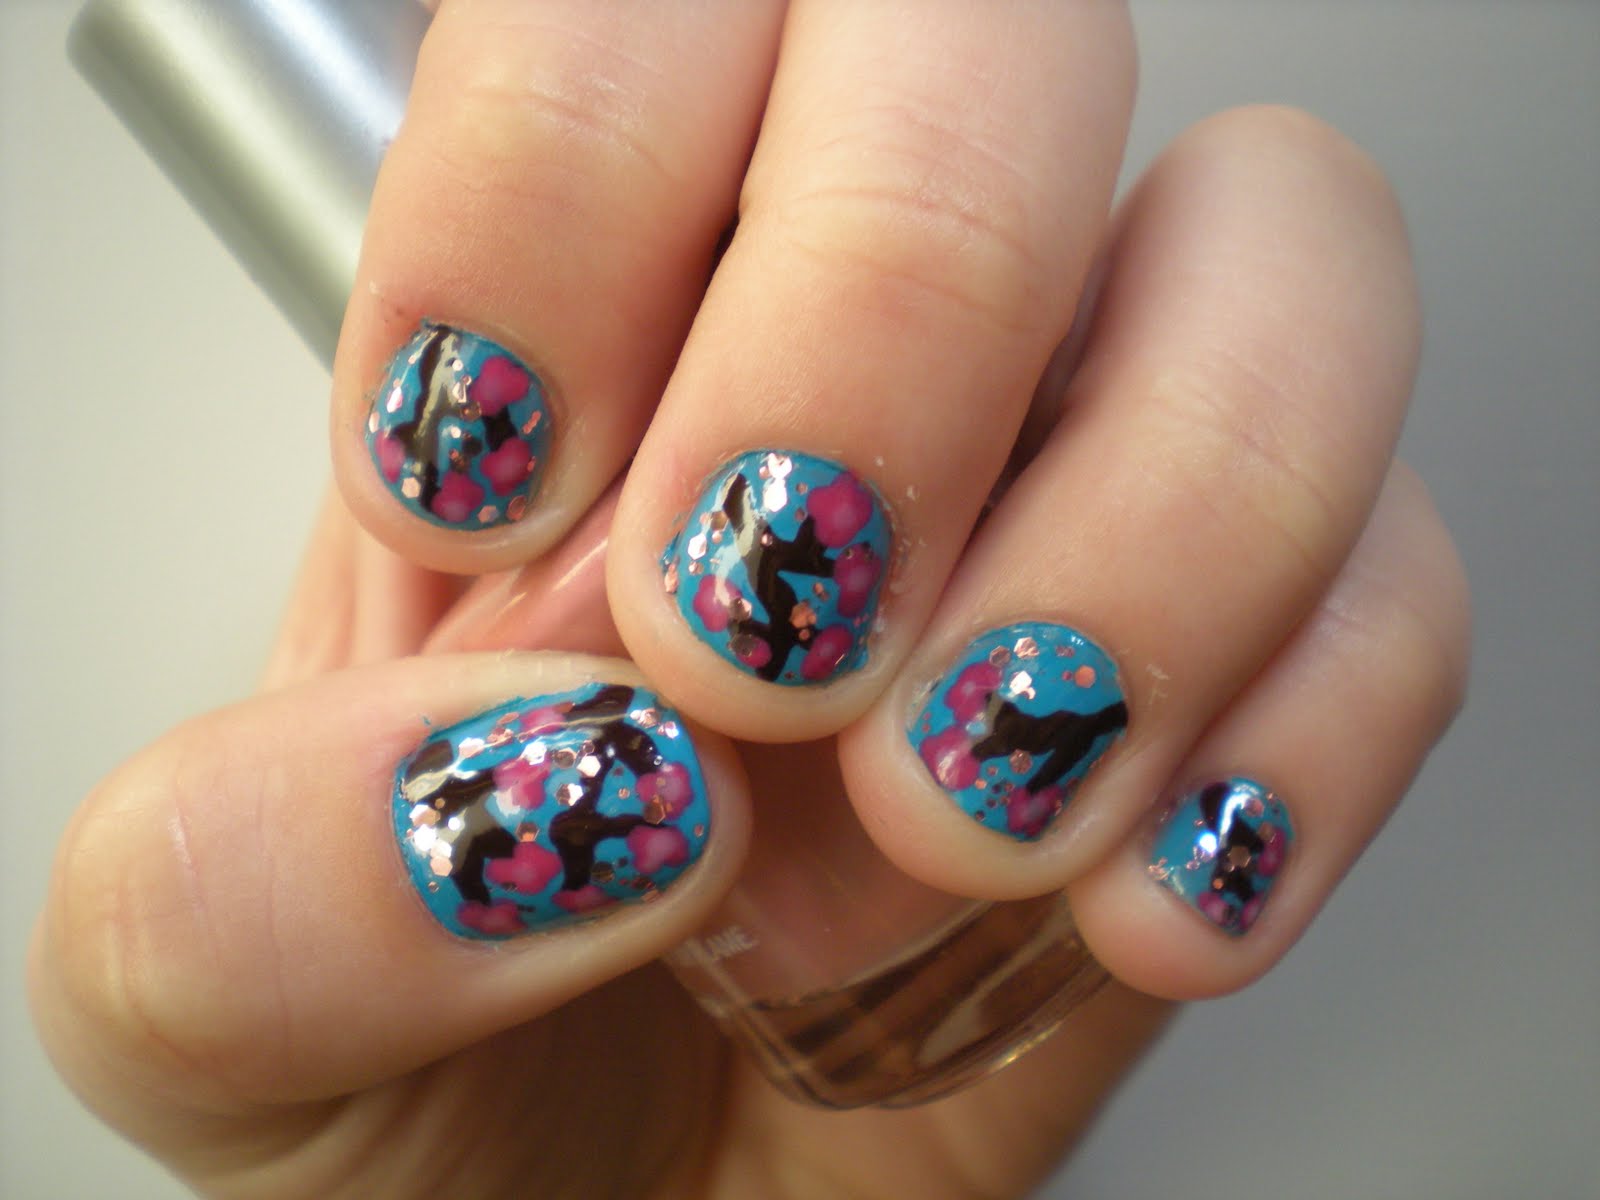 4. "15 Cute Nail Designs for Short Nails" - wide 4